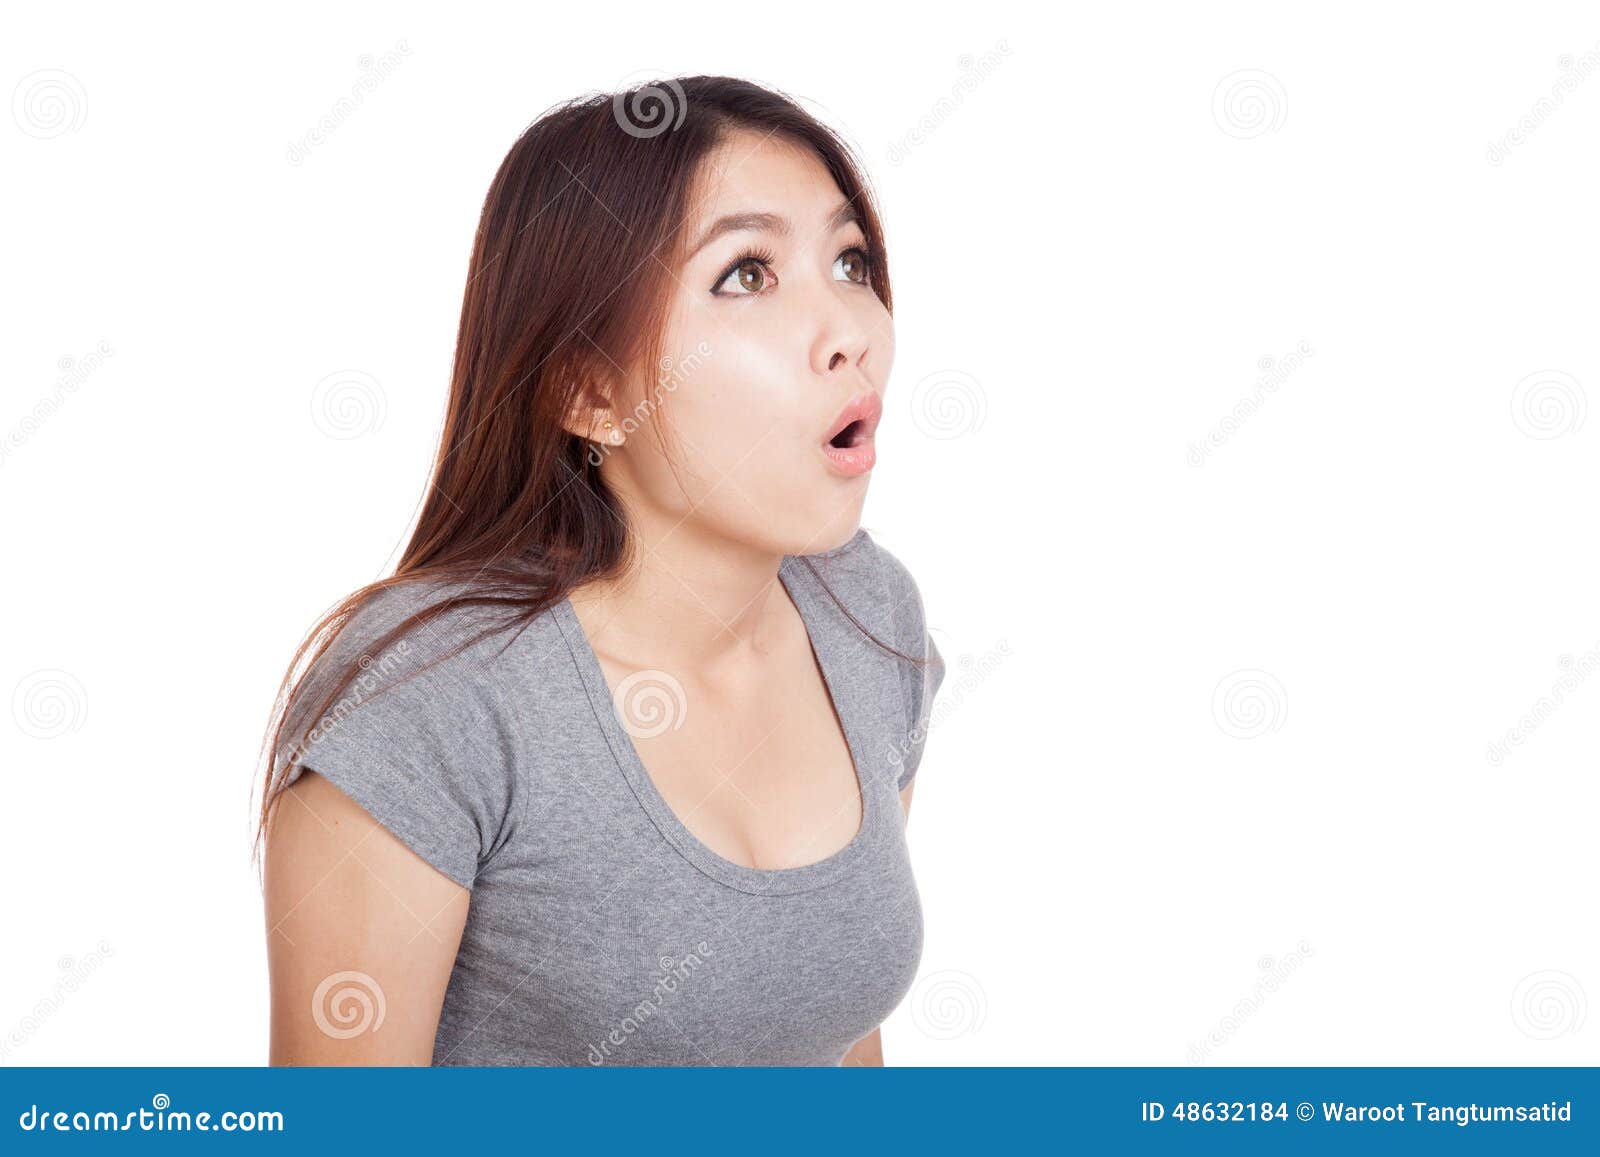 Young Asian Woman Shocked And Look Up Stock Photo - Image: 48632184